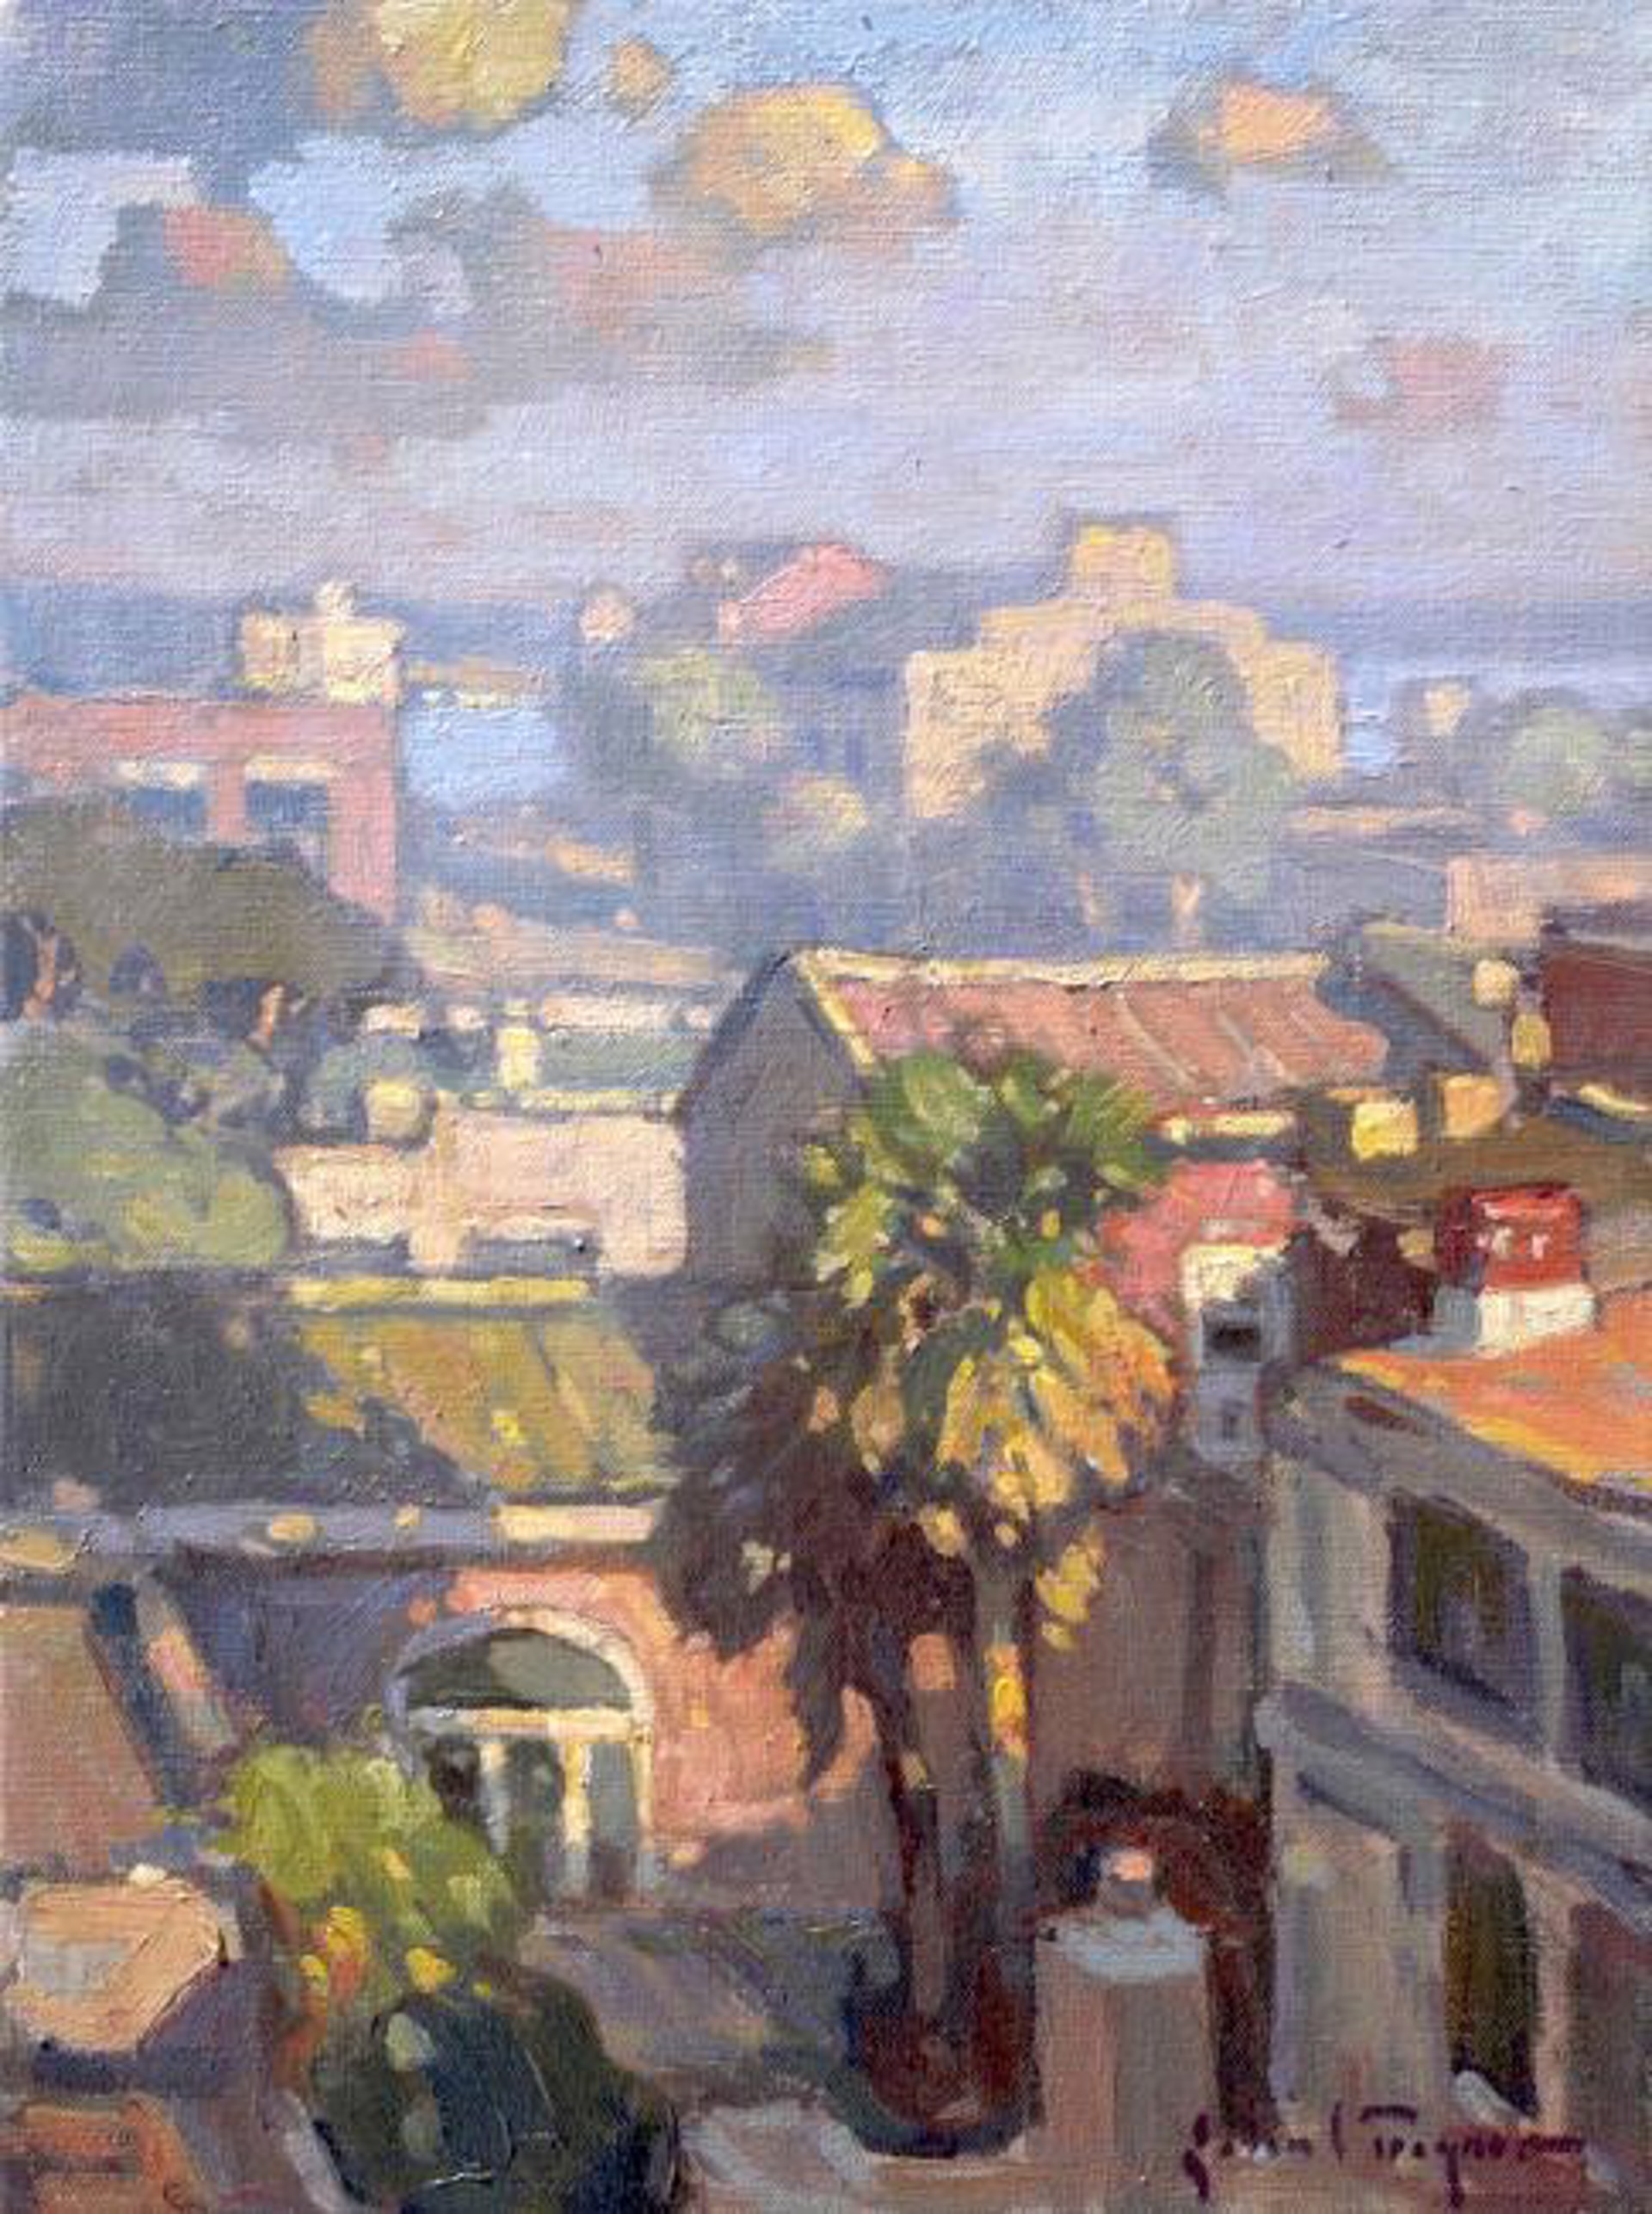 Rooftop View, Charleston by John C. Traynor